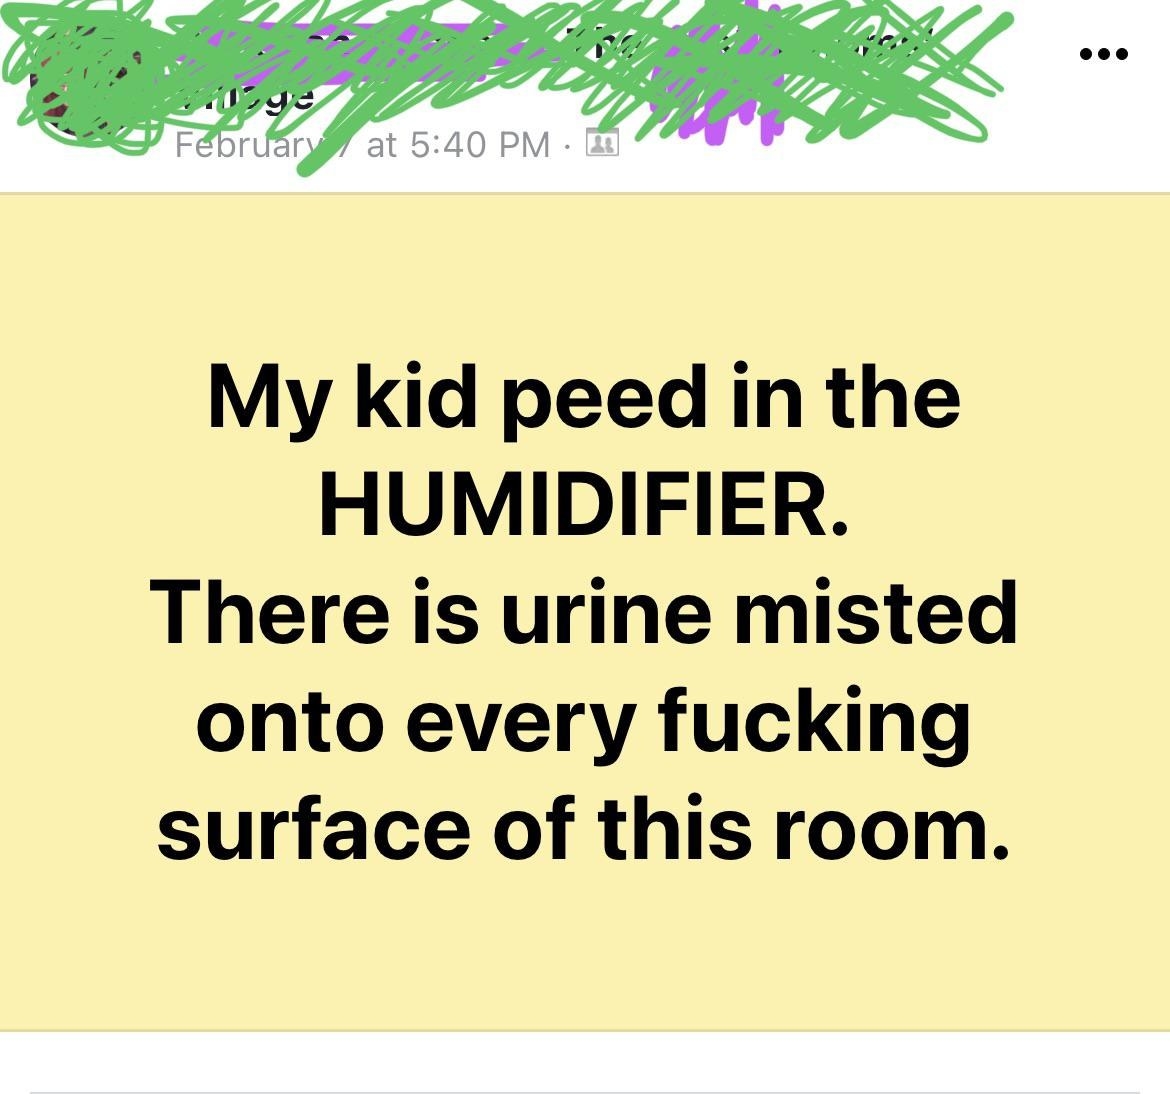 Kid peed in a humidifier and now urine is misted onto every surface of the room